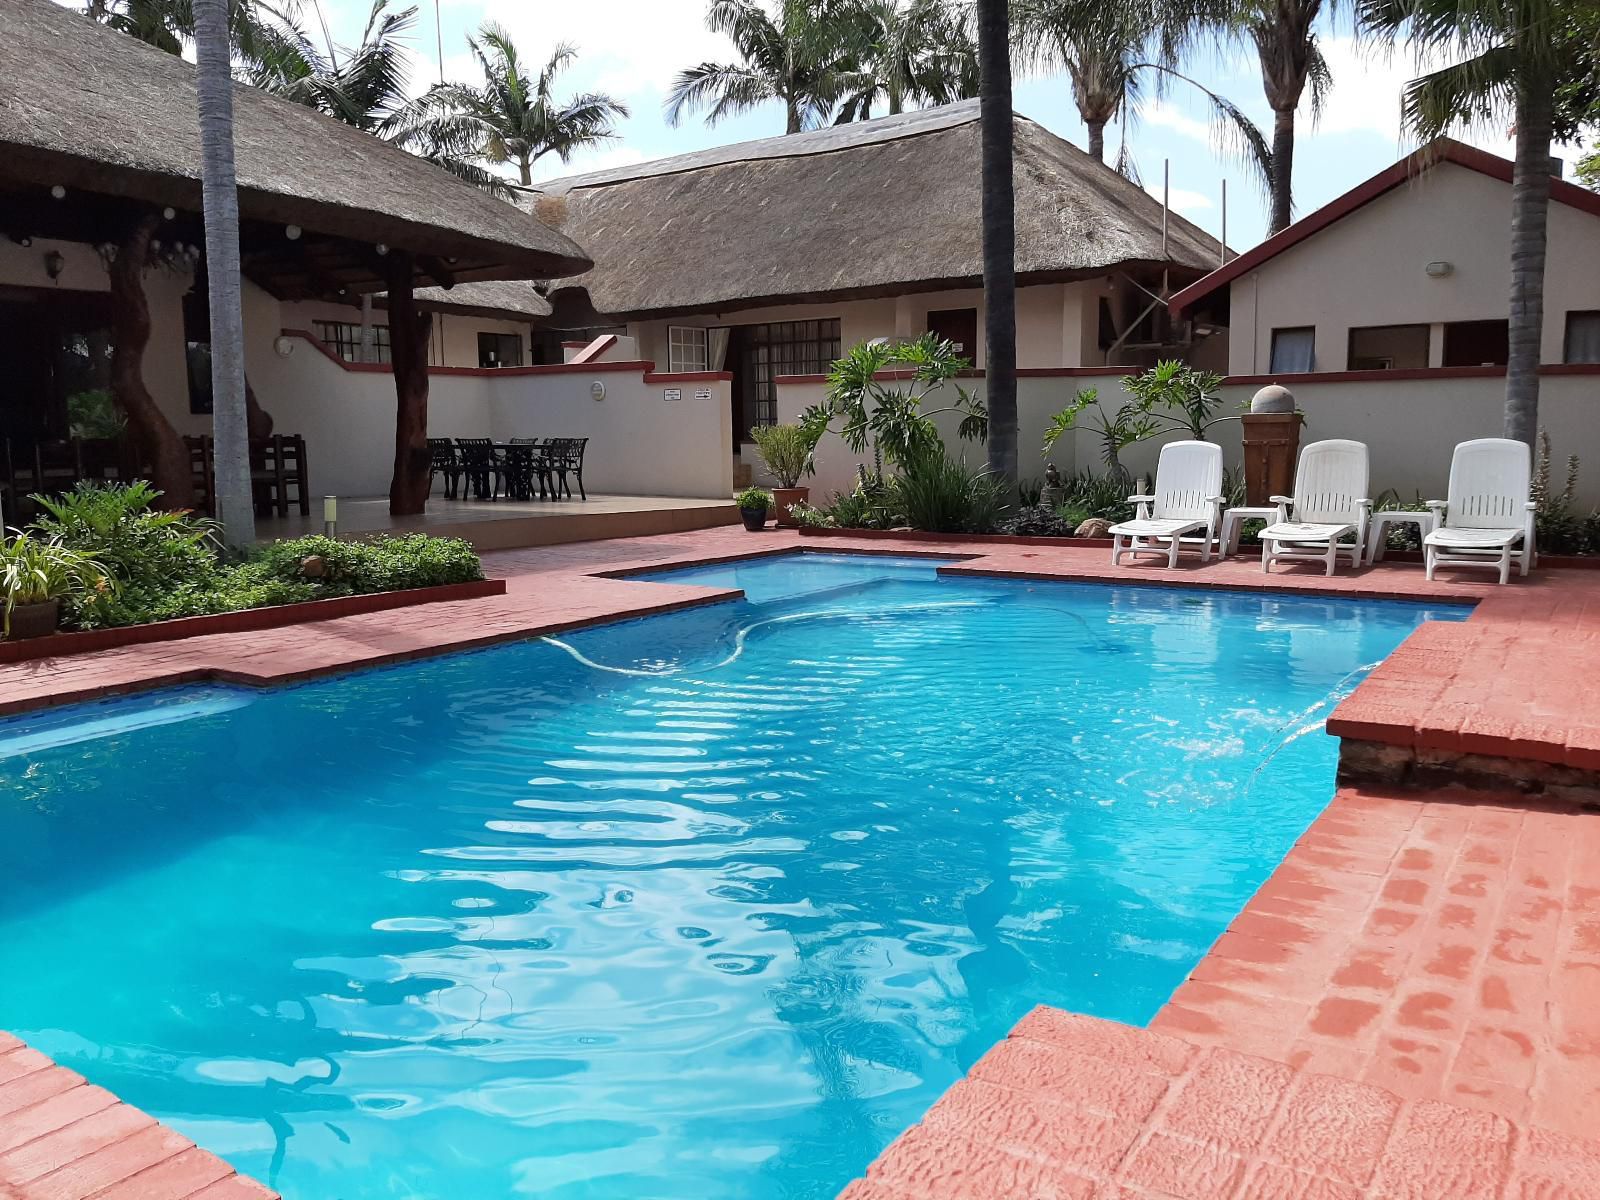 Marlot Guest House And Bandb Polokwane Ext 4 Polokwane Pietersburg Limpopo Province South Africa Complementary Colors, House, Building, Architecture, Palm Tree, Plant, Nature, Wood, Swimming Pool